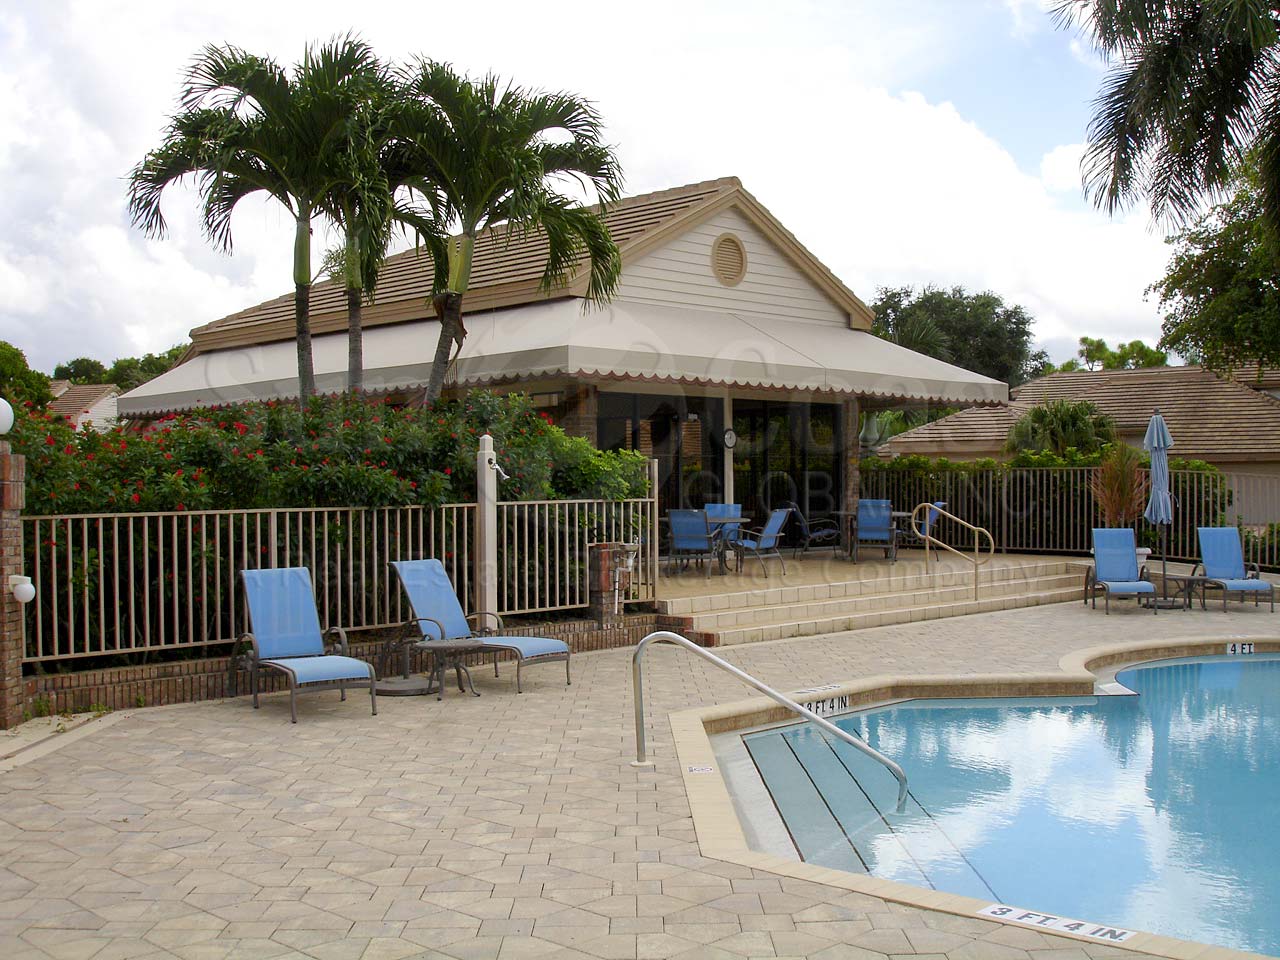 Villas Community Pool and Clubhouse